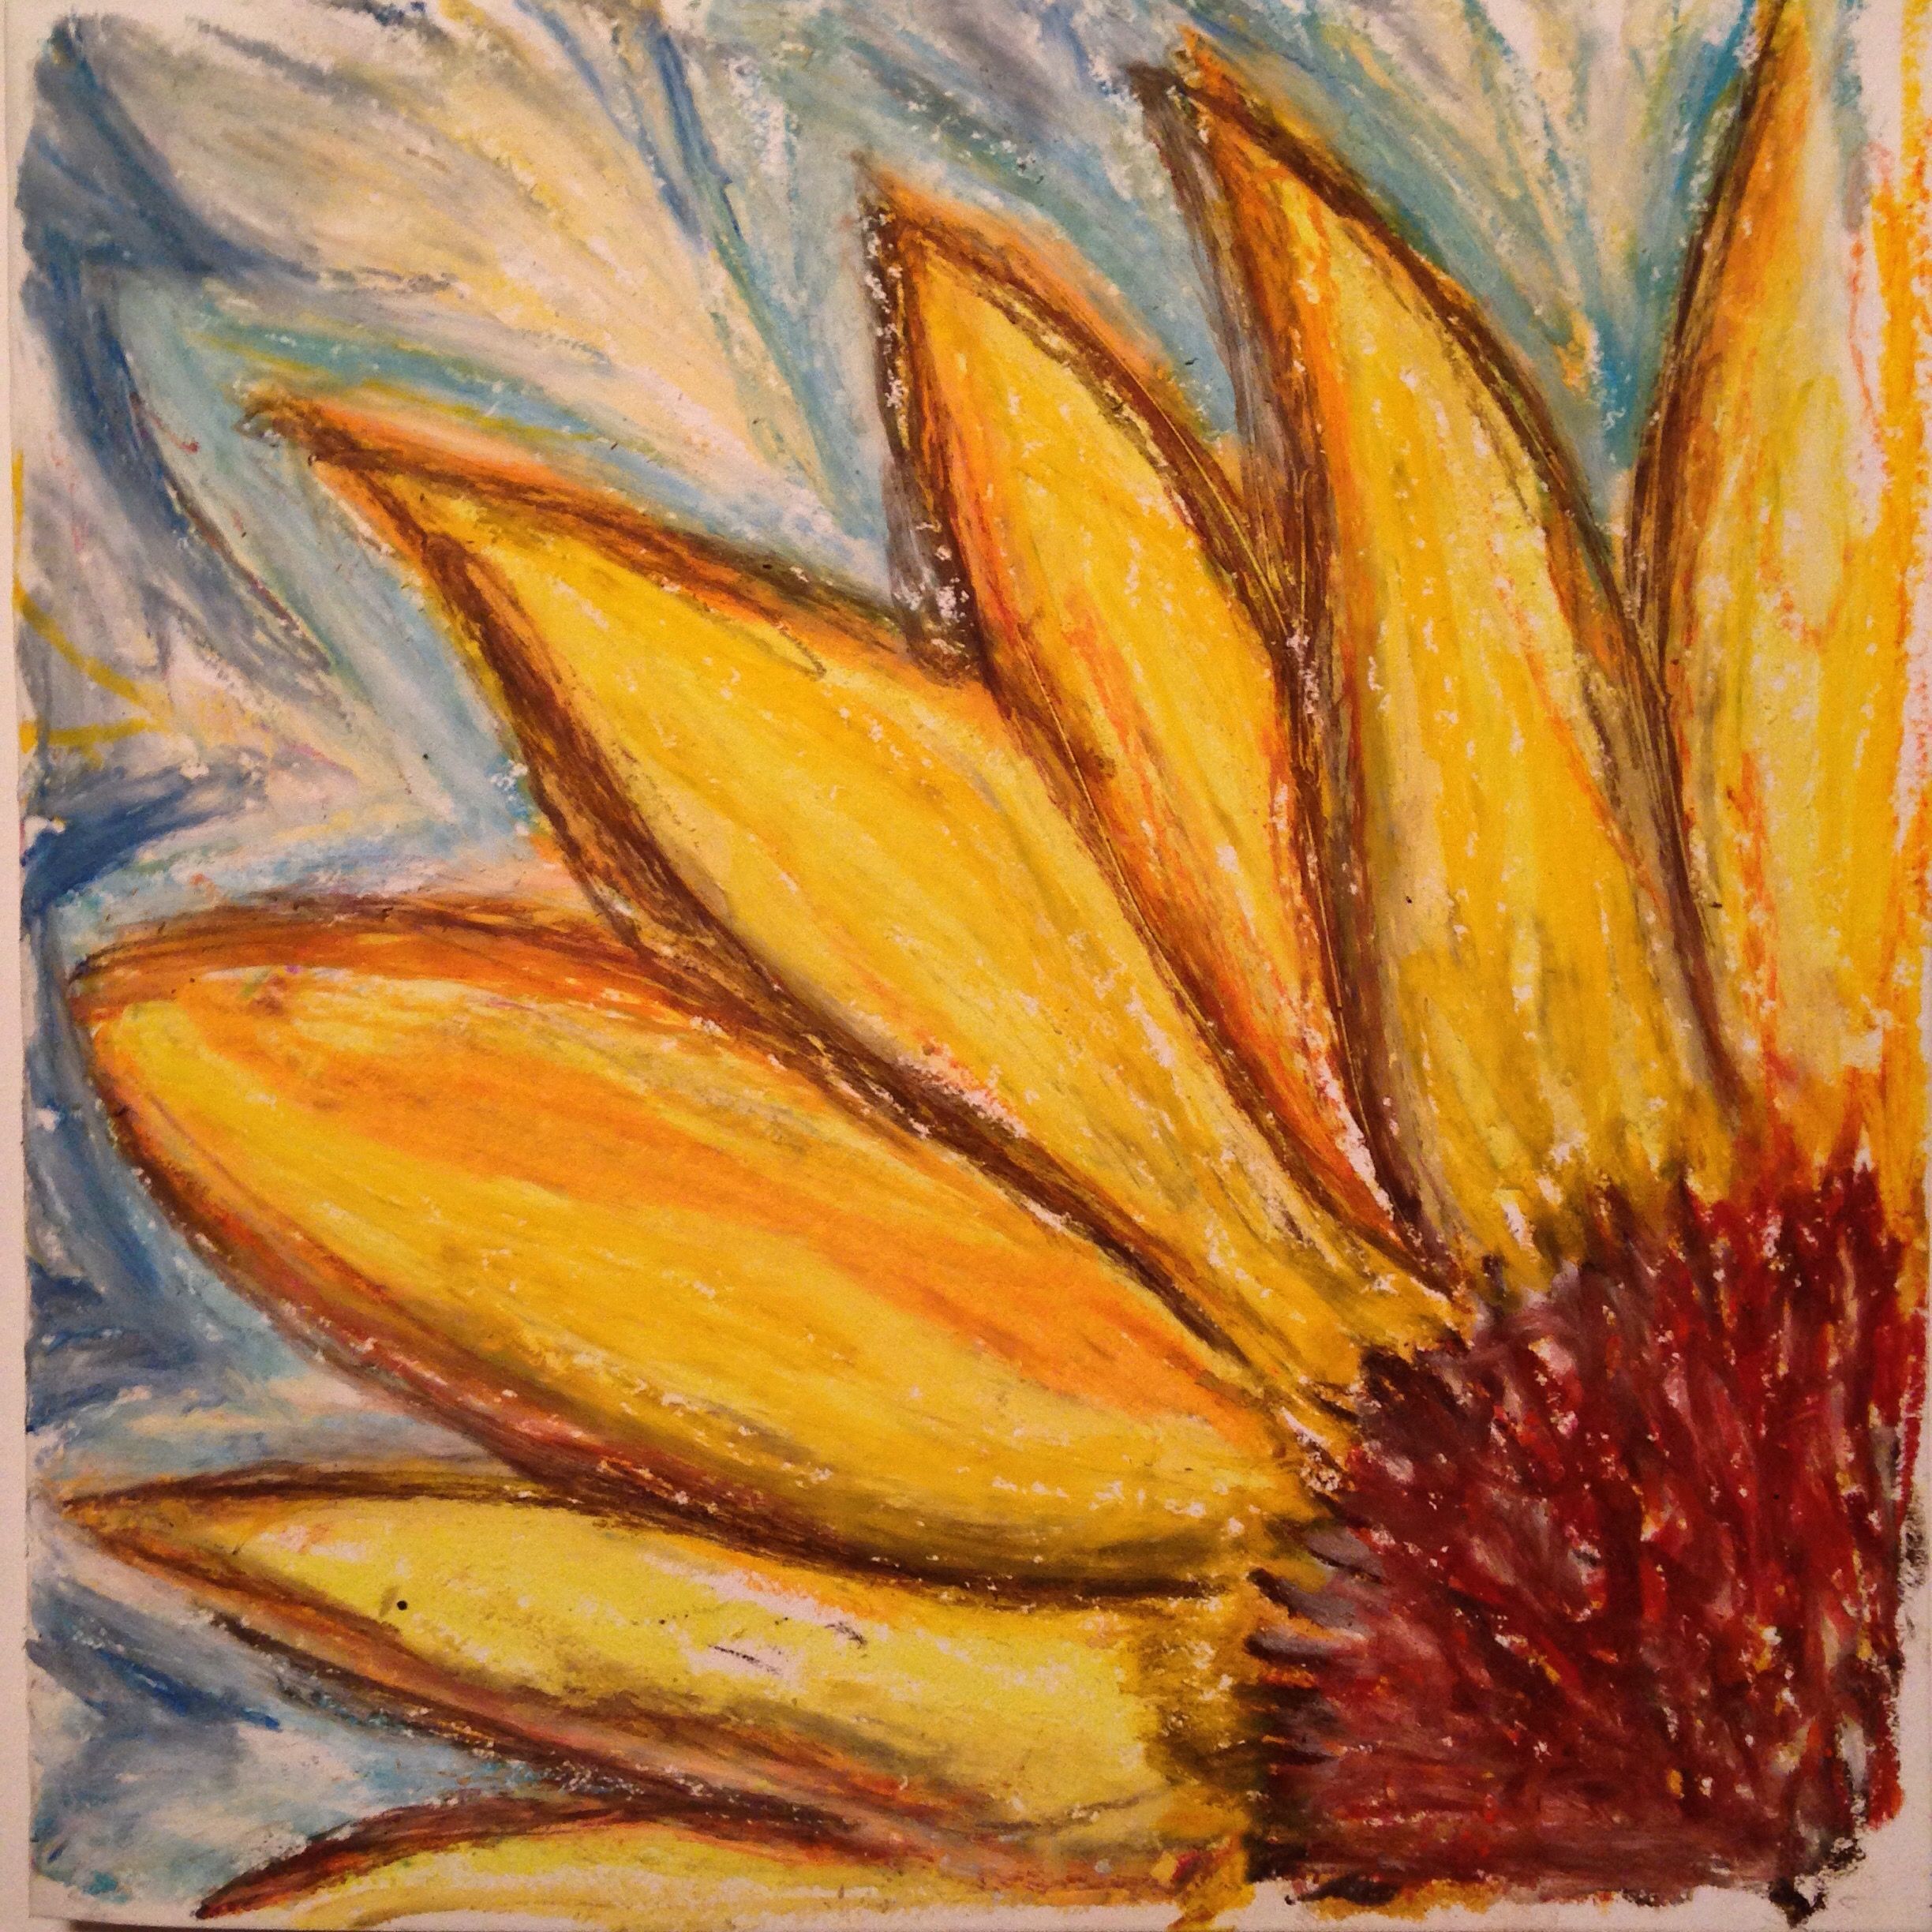 Sunflower - abstract oil pastel drawing by Onny @artbyonny | Art ...